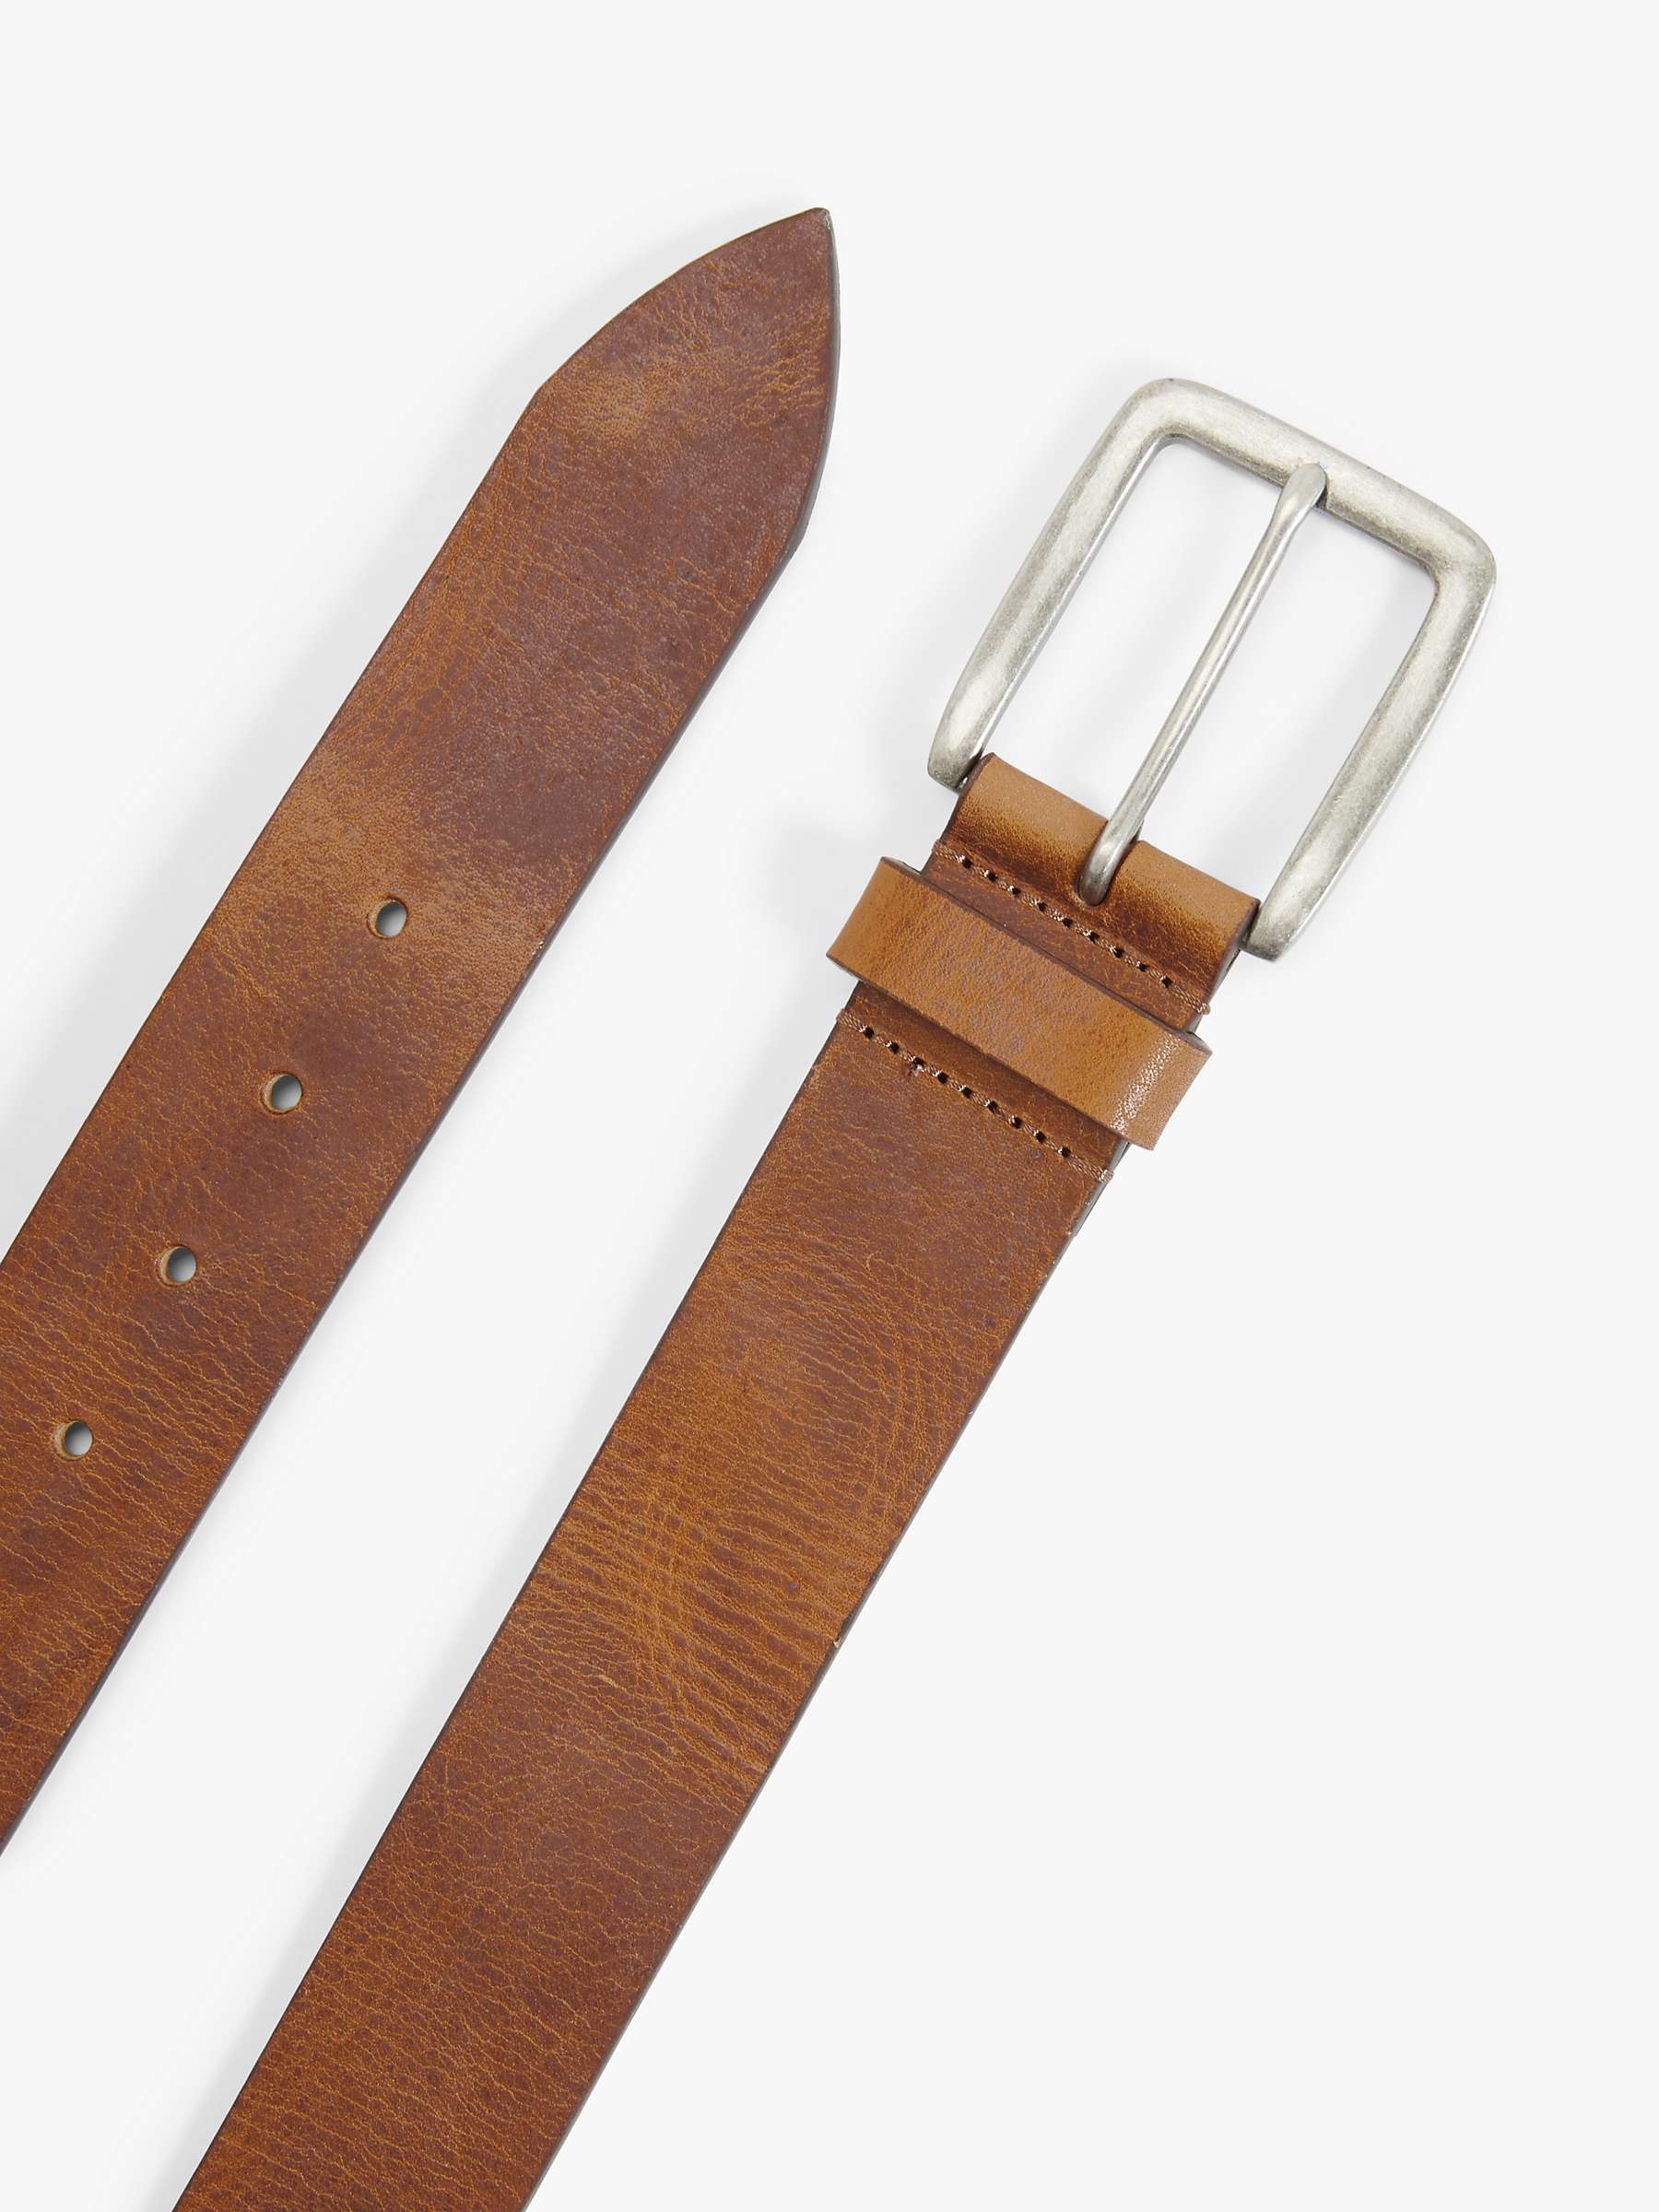 Buy John Lewis Made in Italy 40mm Leather Jeans Belt, Tan Online at johnlewis.com